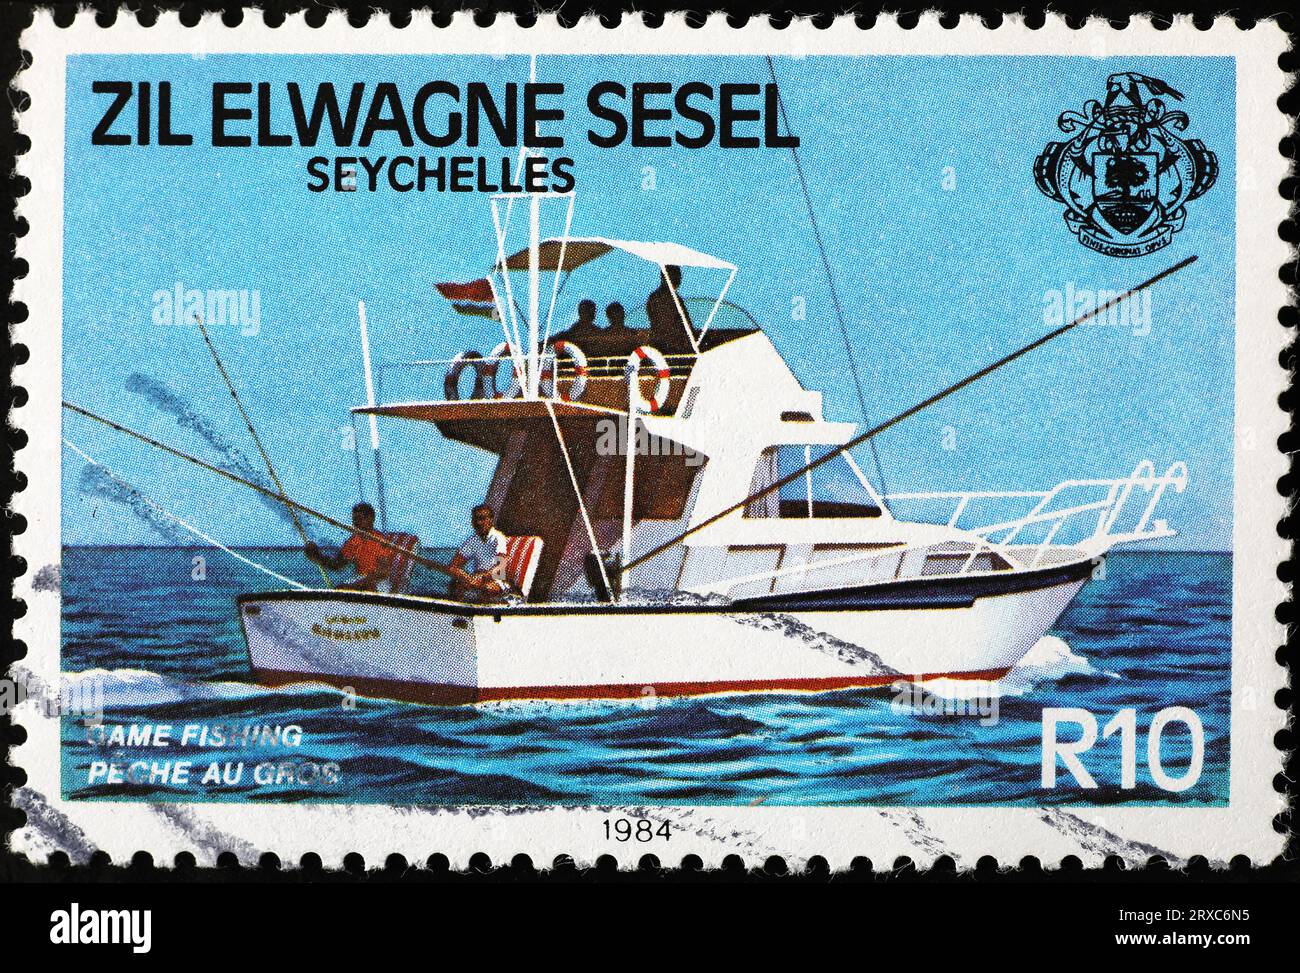 Game fishing celebration on postage stamp from Seychelles Stock Photo